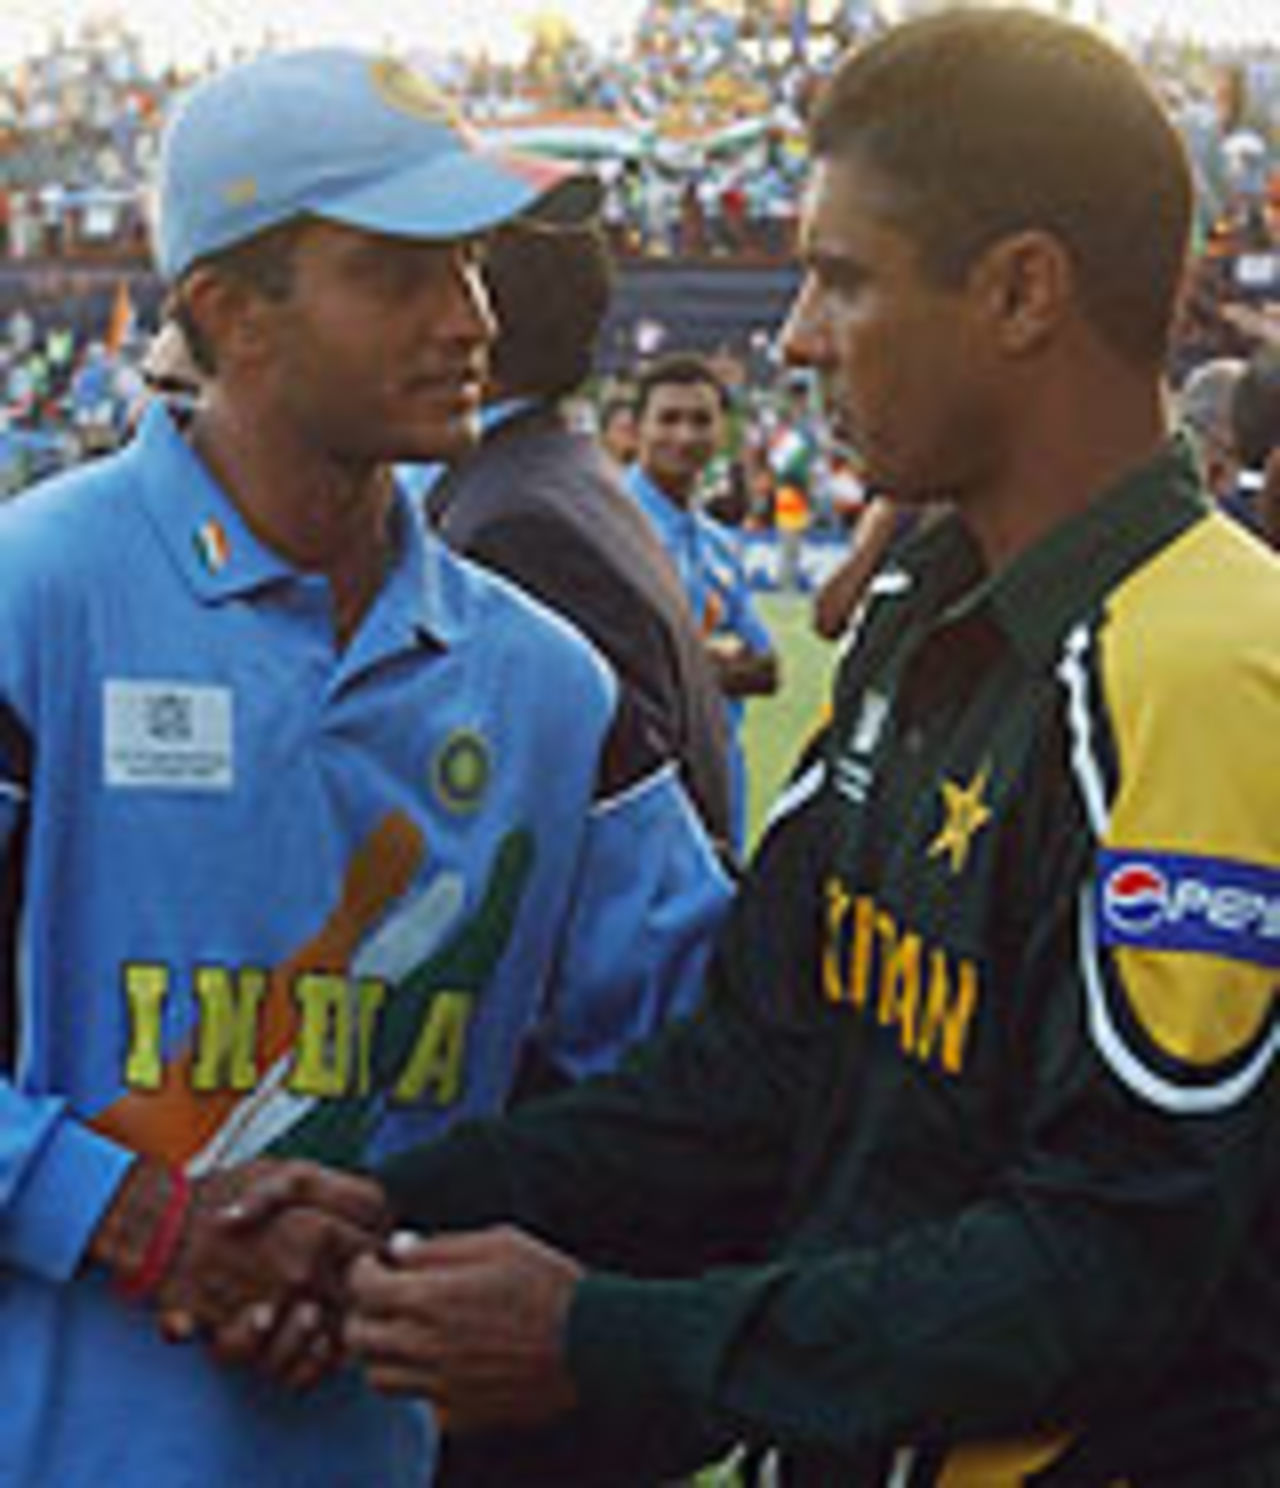 Sourav Ganguly and Waqar Younis, India v Pakistan, World Cup 2003, March 1, 2003